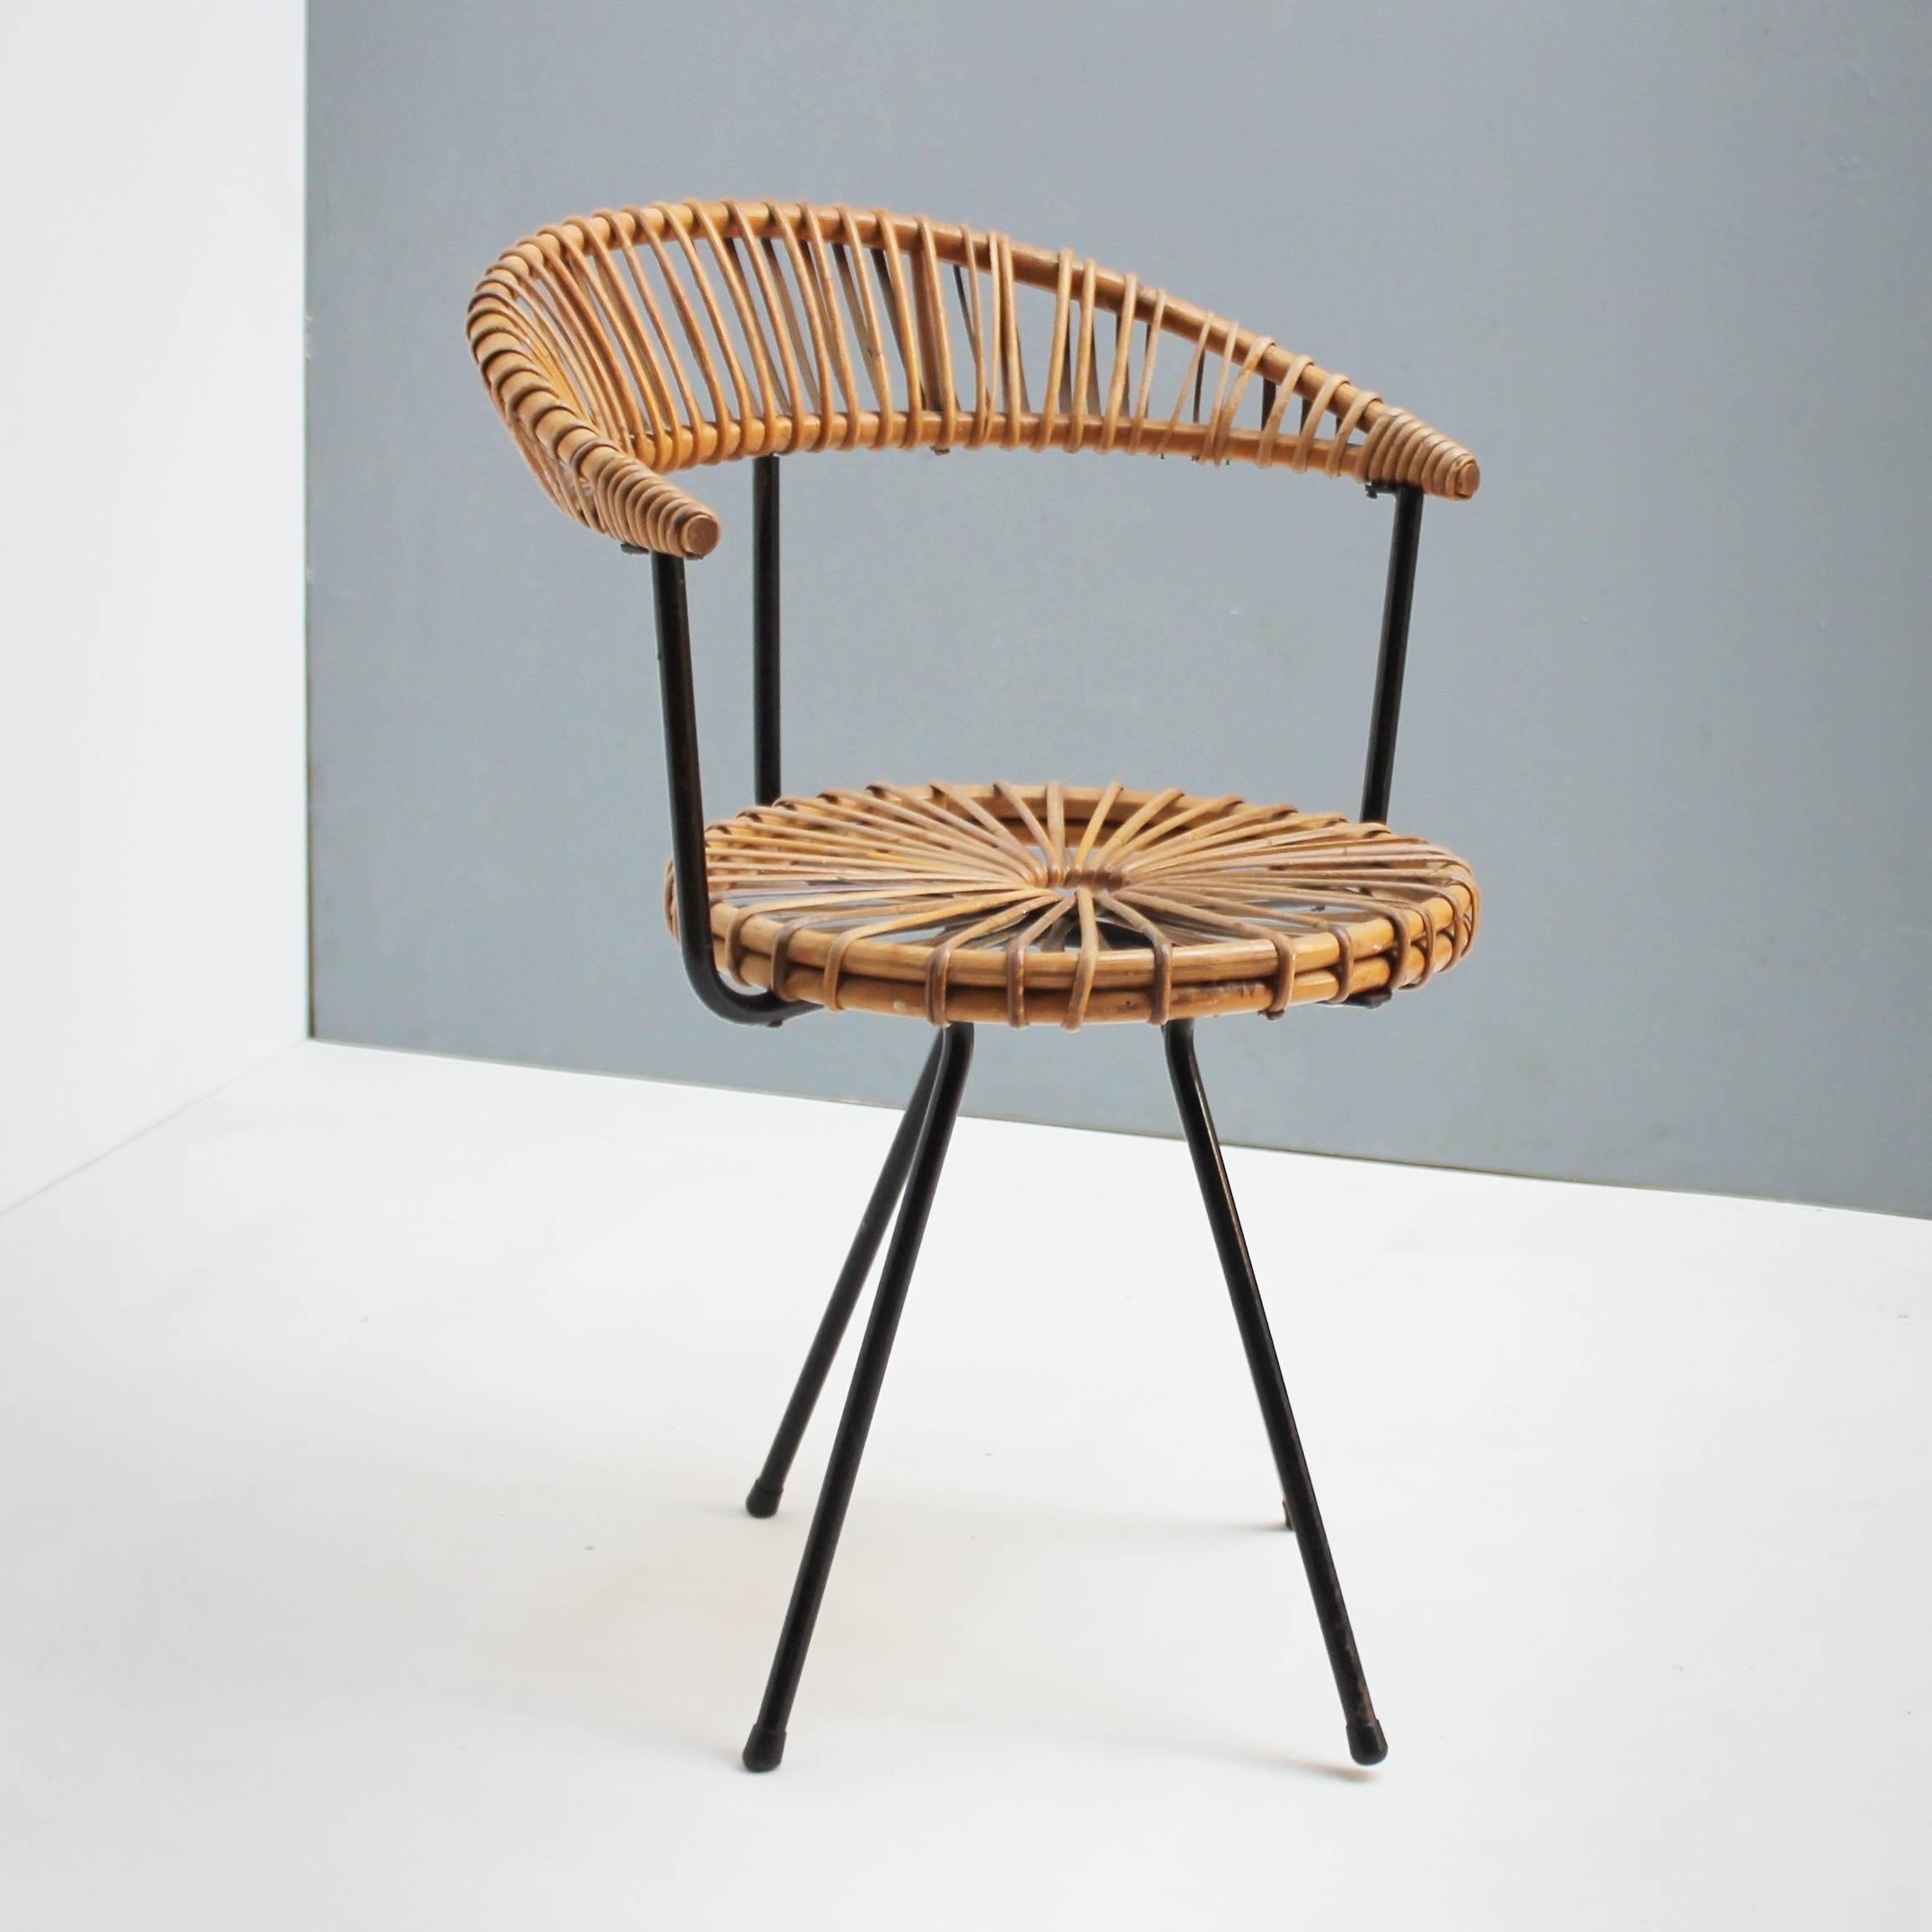 Lacquered Rattan Chair by Dirk Van Sliedregt for Rohe Holland